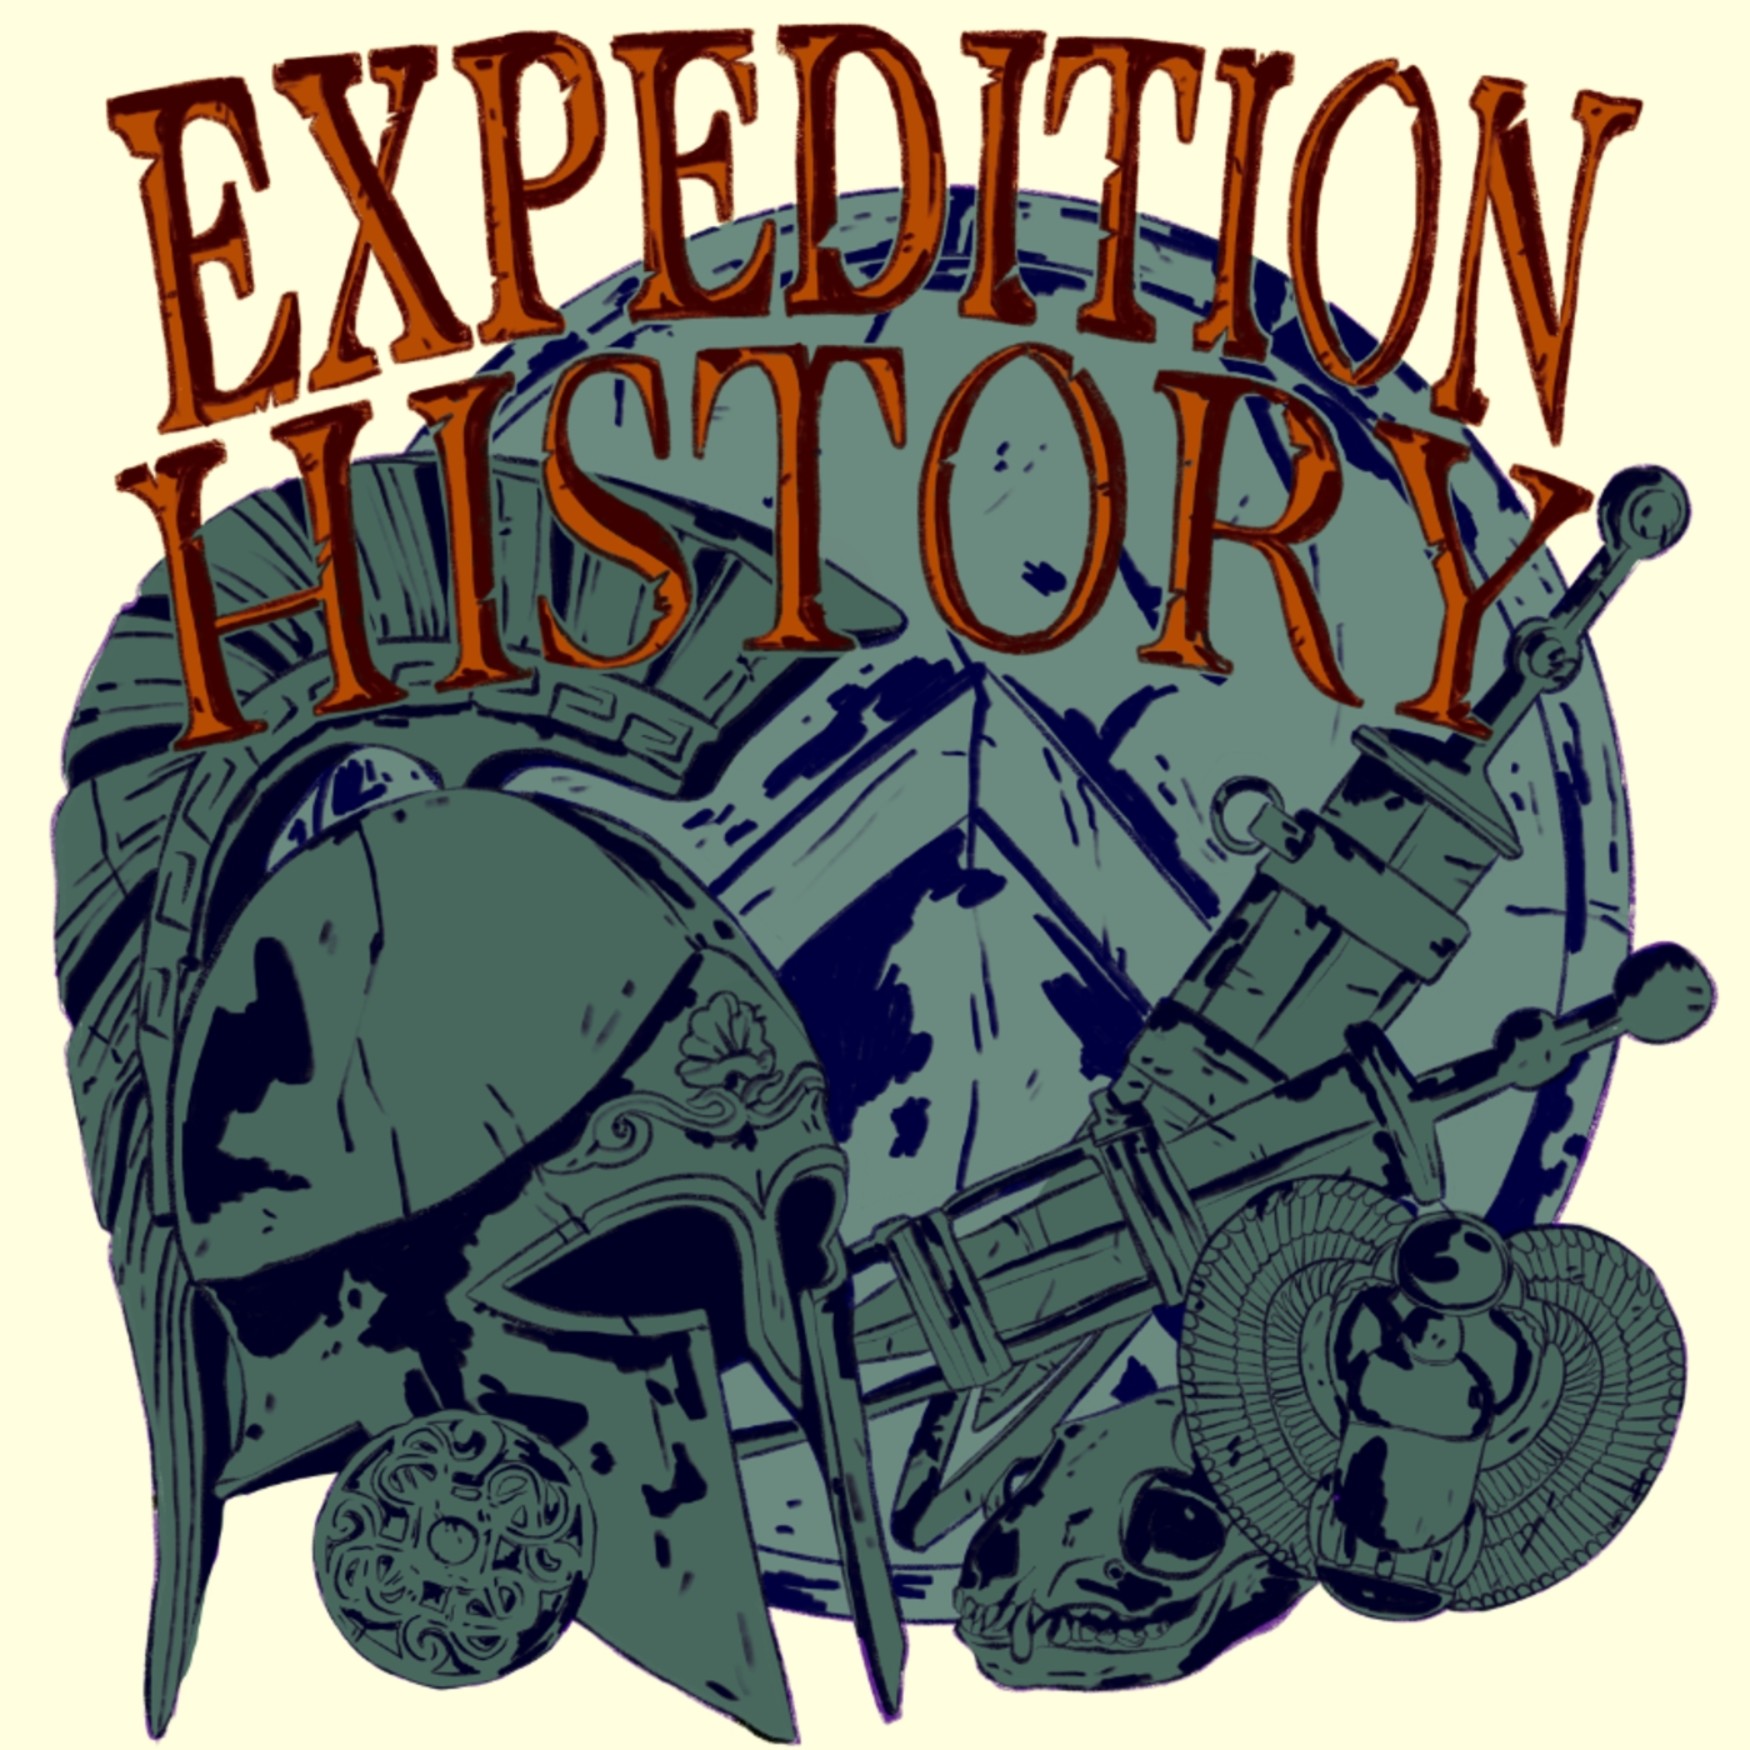 Expedition History